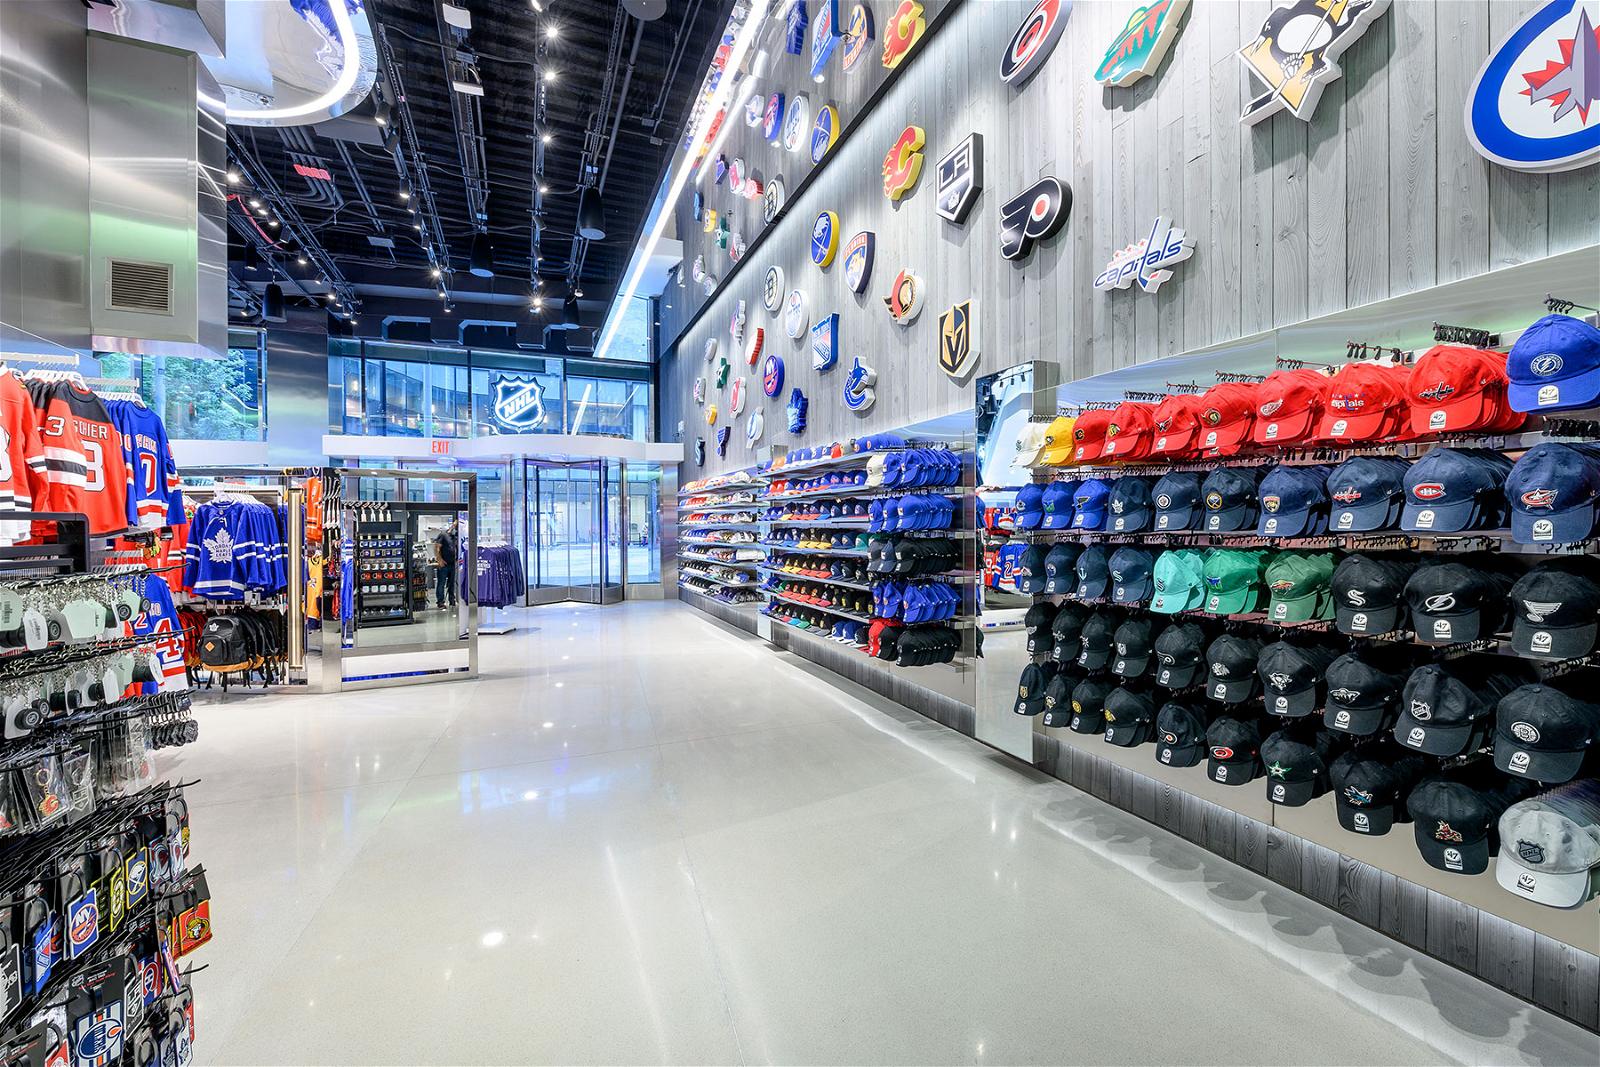 NHL Shop NYC - The all-new NHL Shop flagship store in New